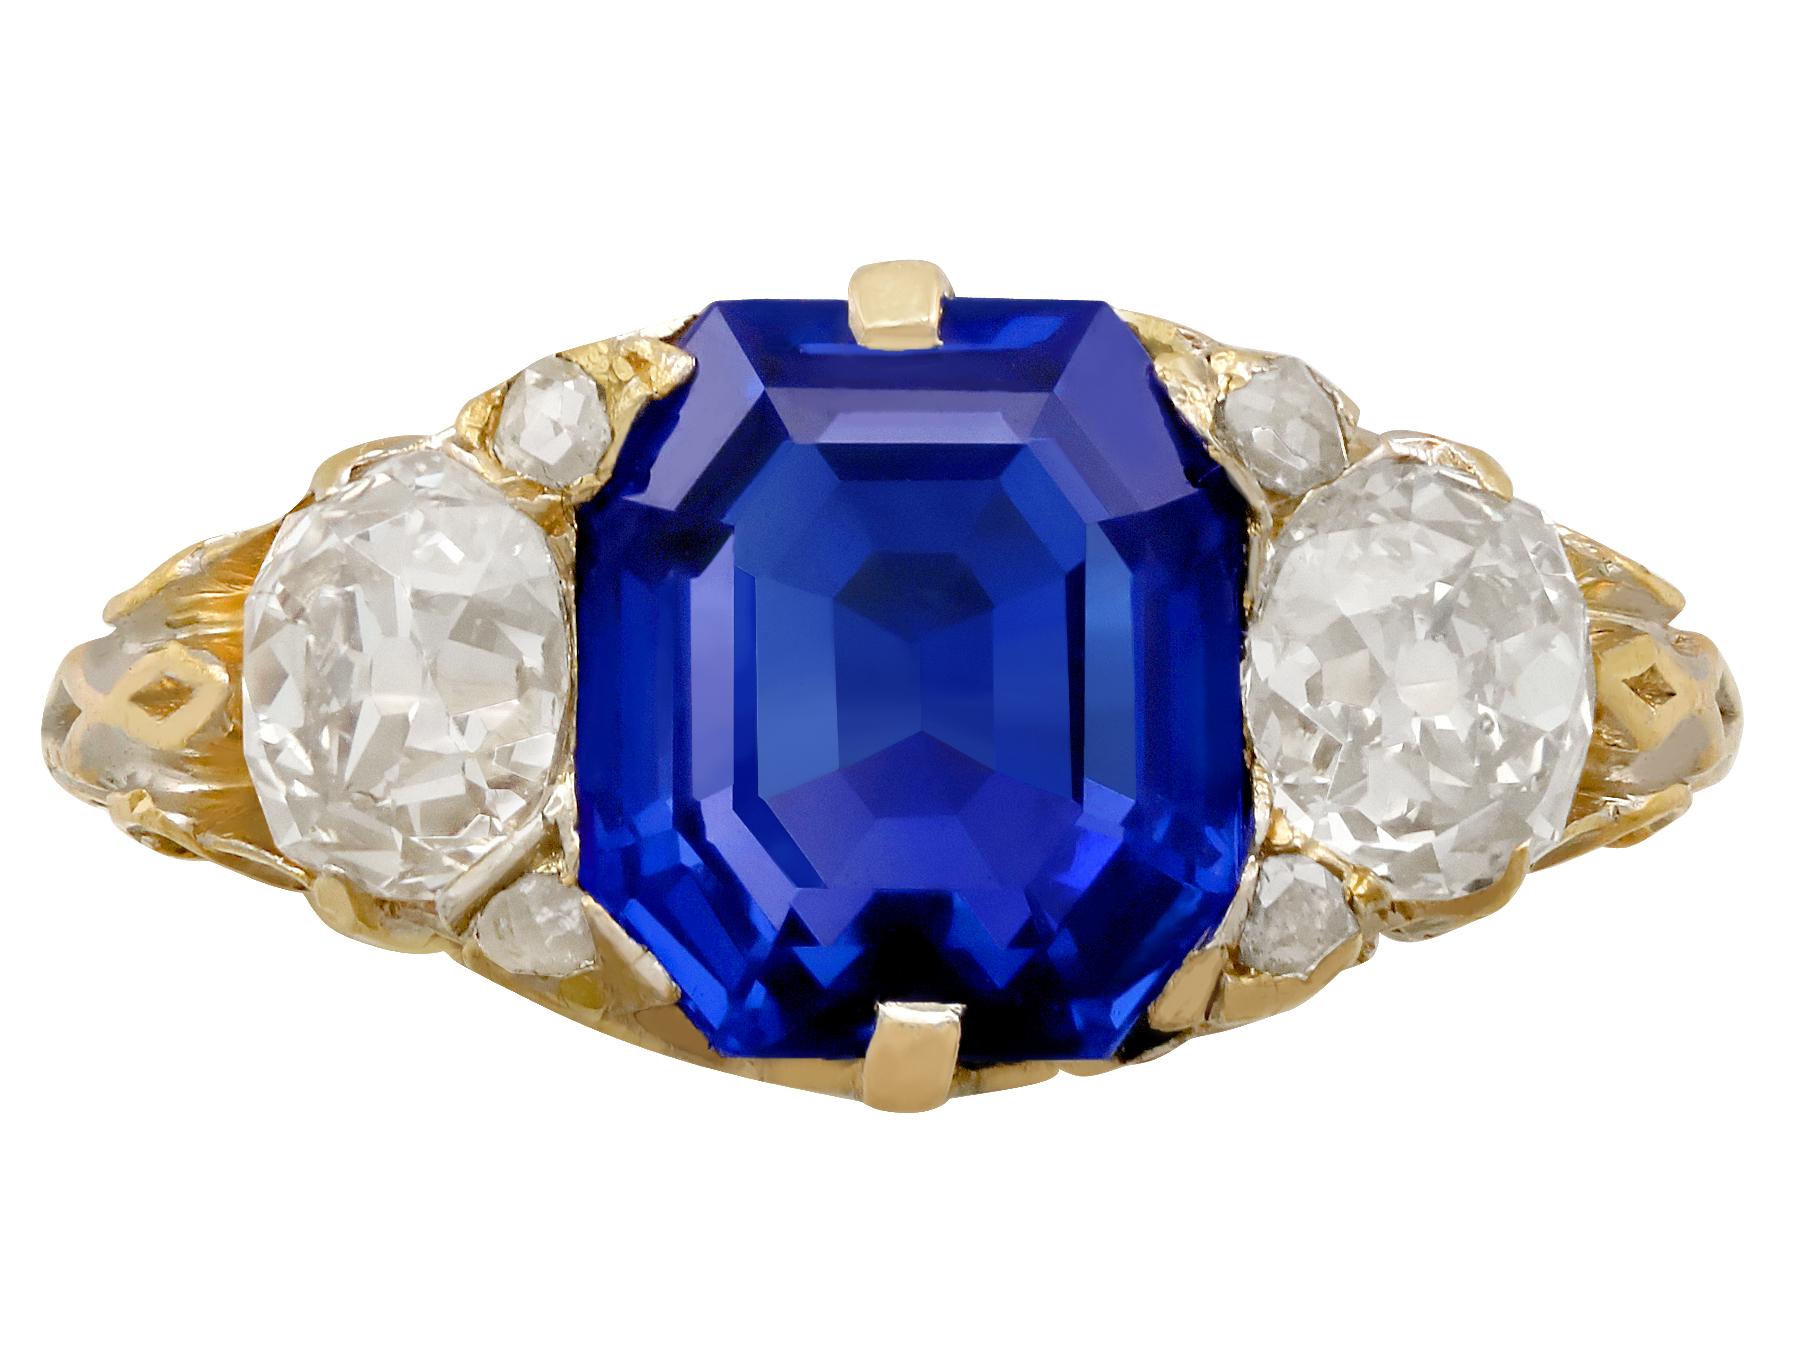 A stunning antique 3.80 carat natural Burmese sapphire and 1.48 carat diamond, 18 karat yellow and white gold trilogy ring; part of our diverse antique jewelry and estate jewelry collections.

This stunning, fine and impressive antique sapphire ring